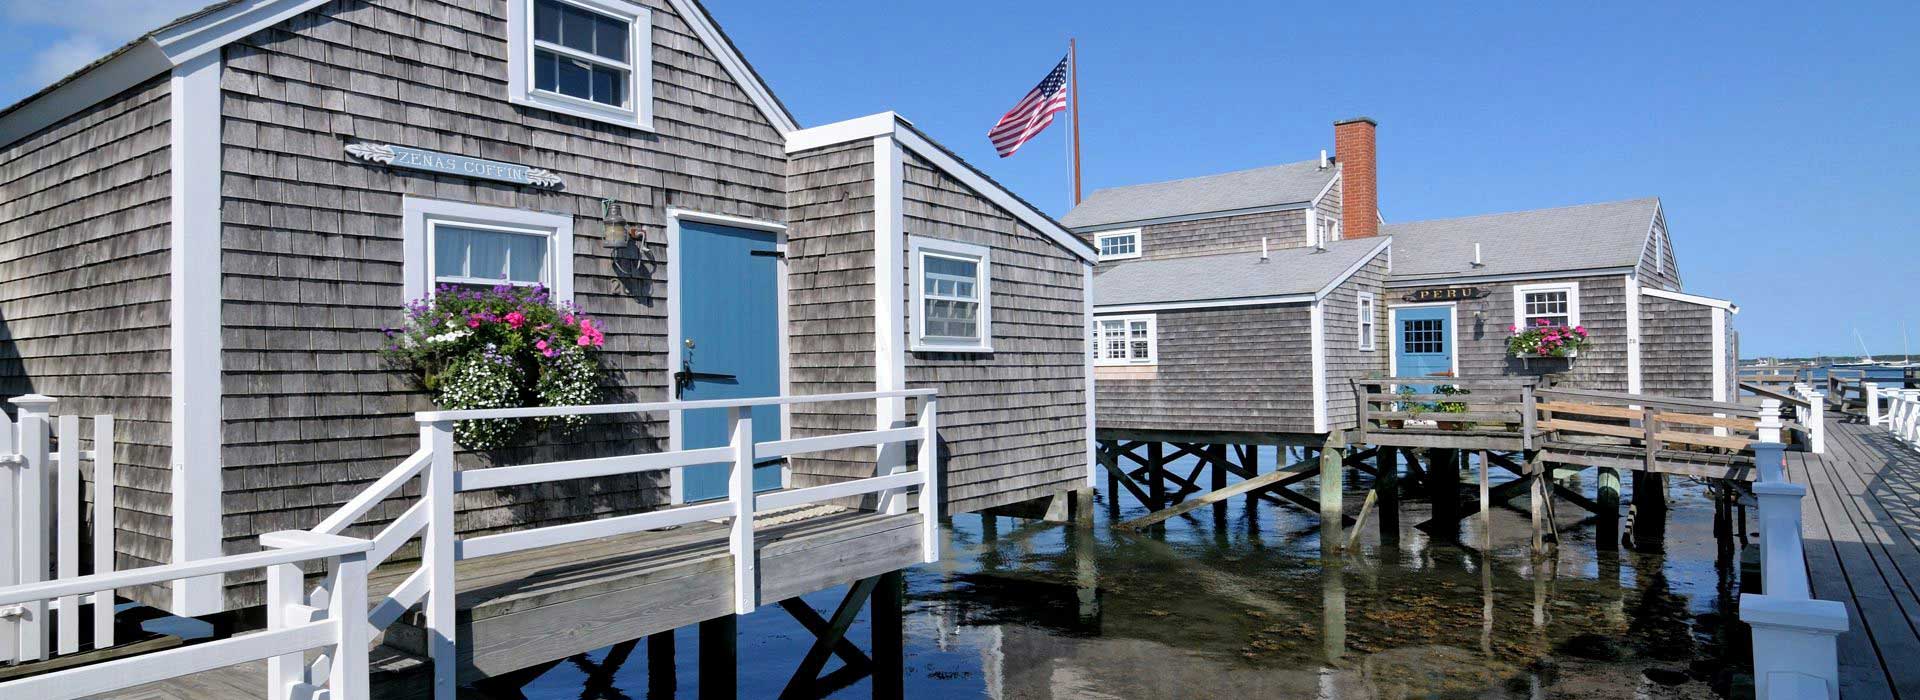 Nantucket Accommodations Hotel Reservation Service And Nantucket